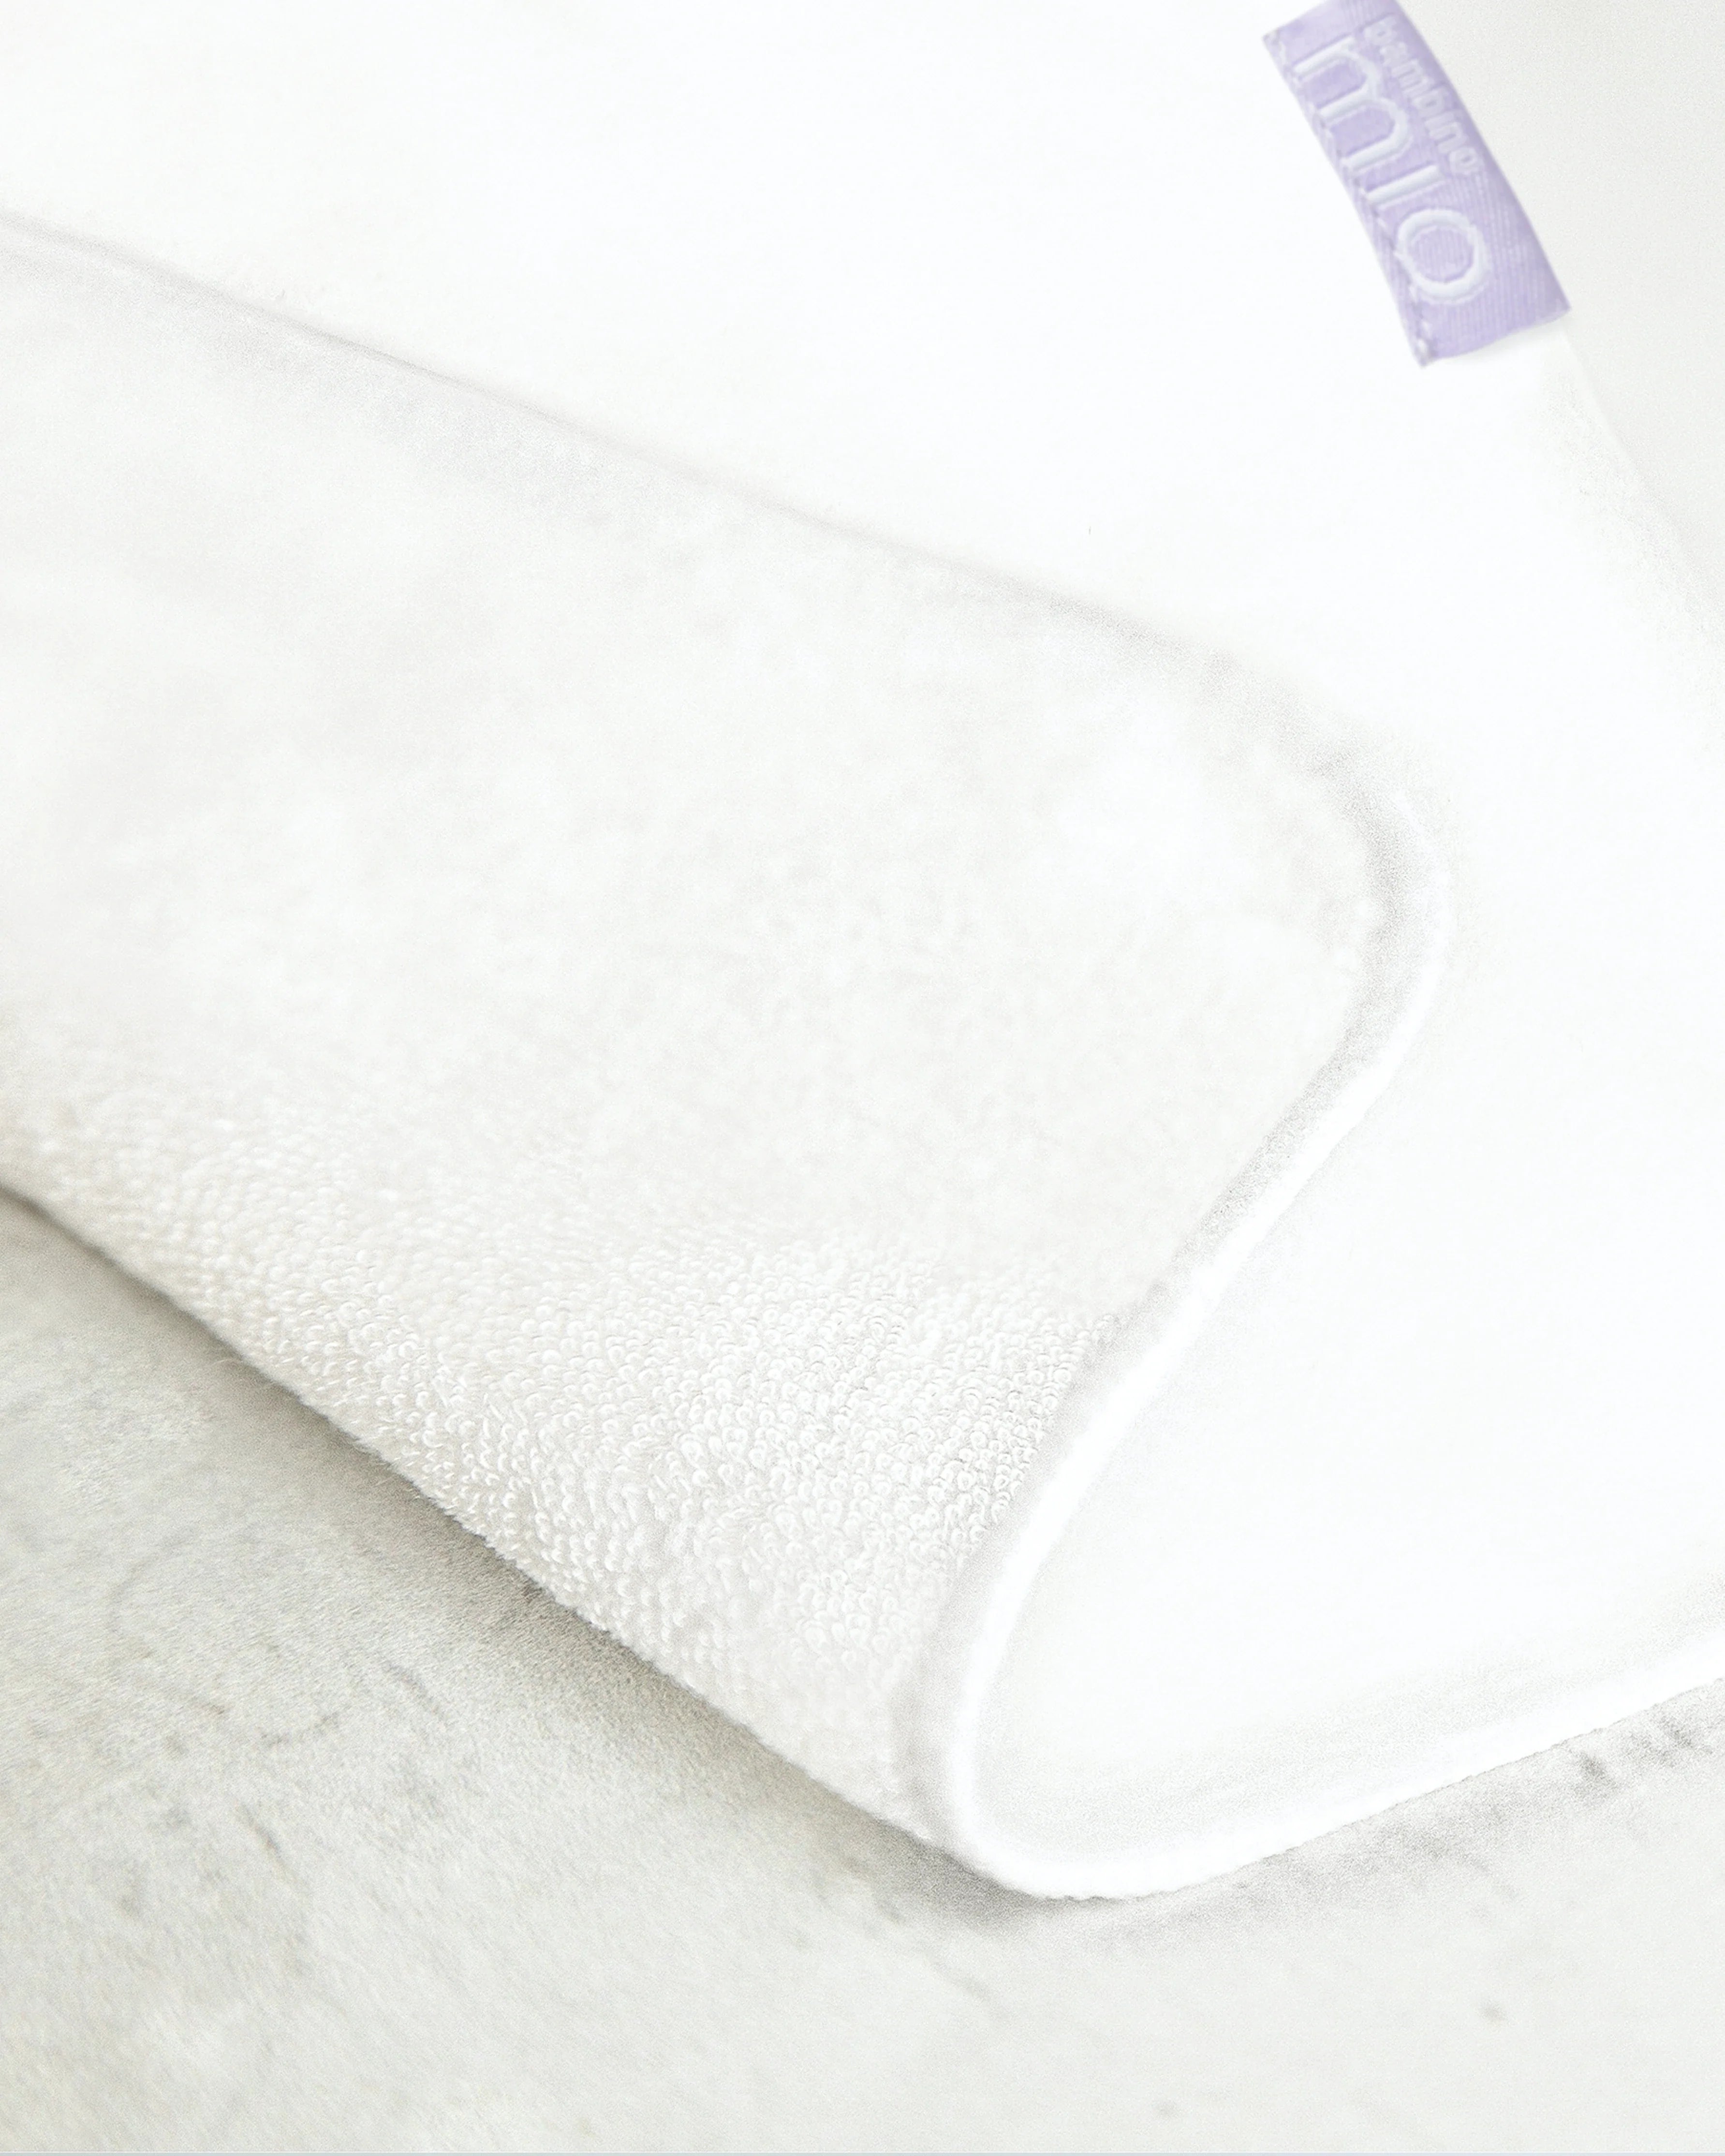 Reusable baby wipes - Everyday Pro